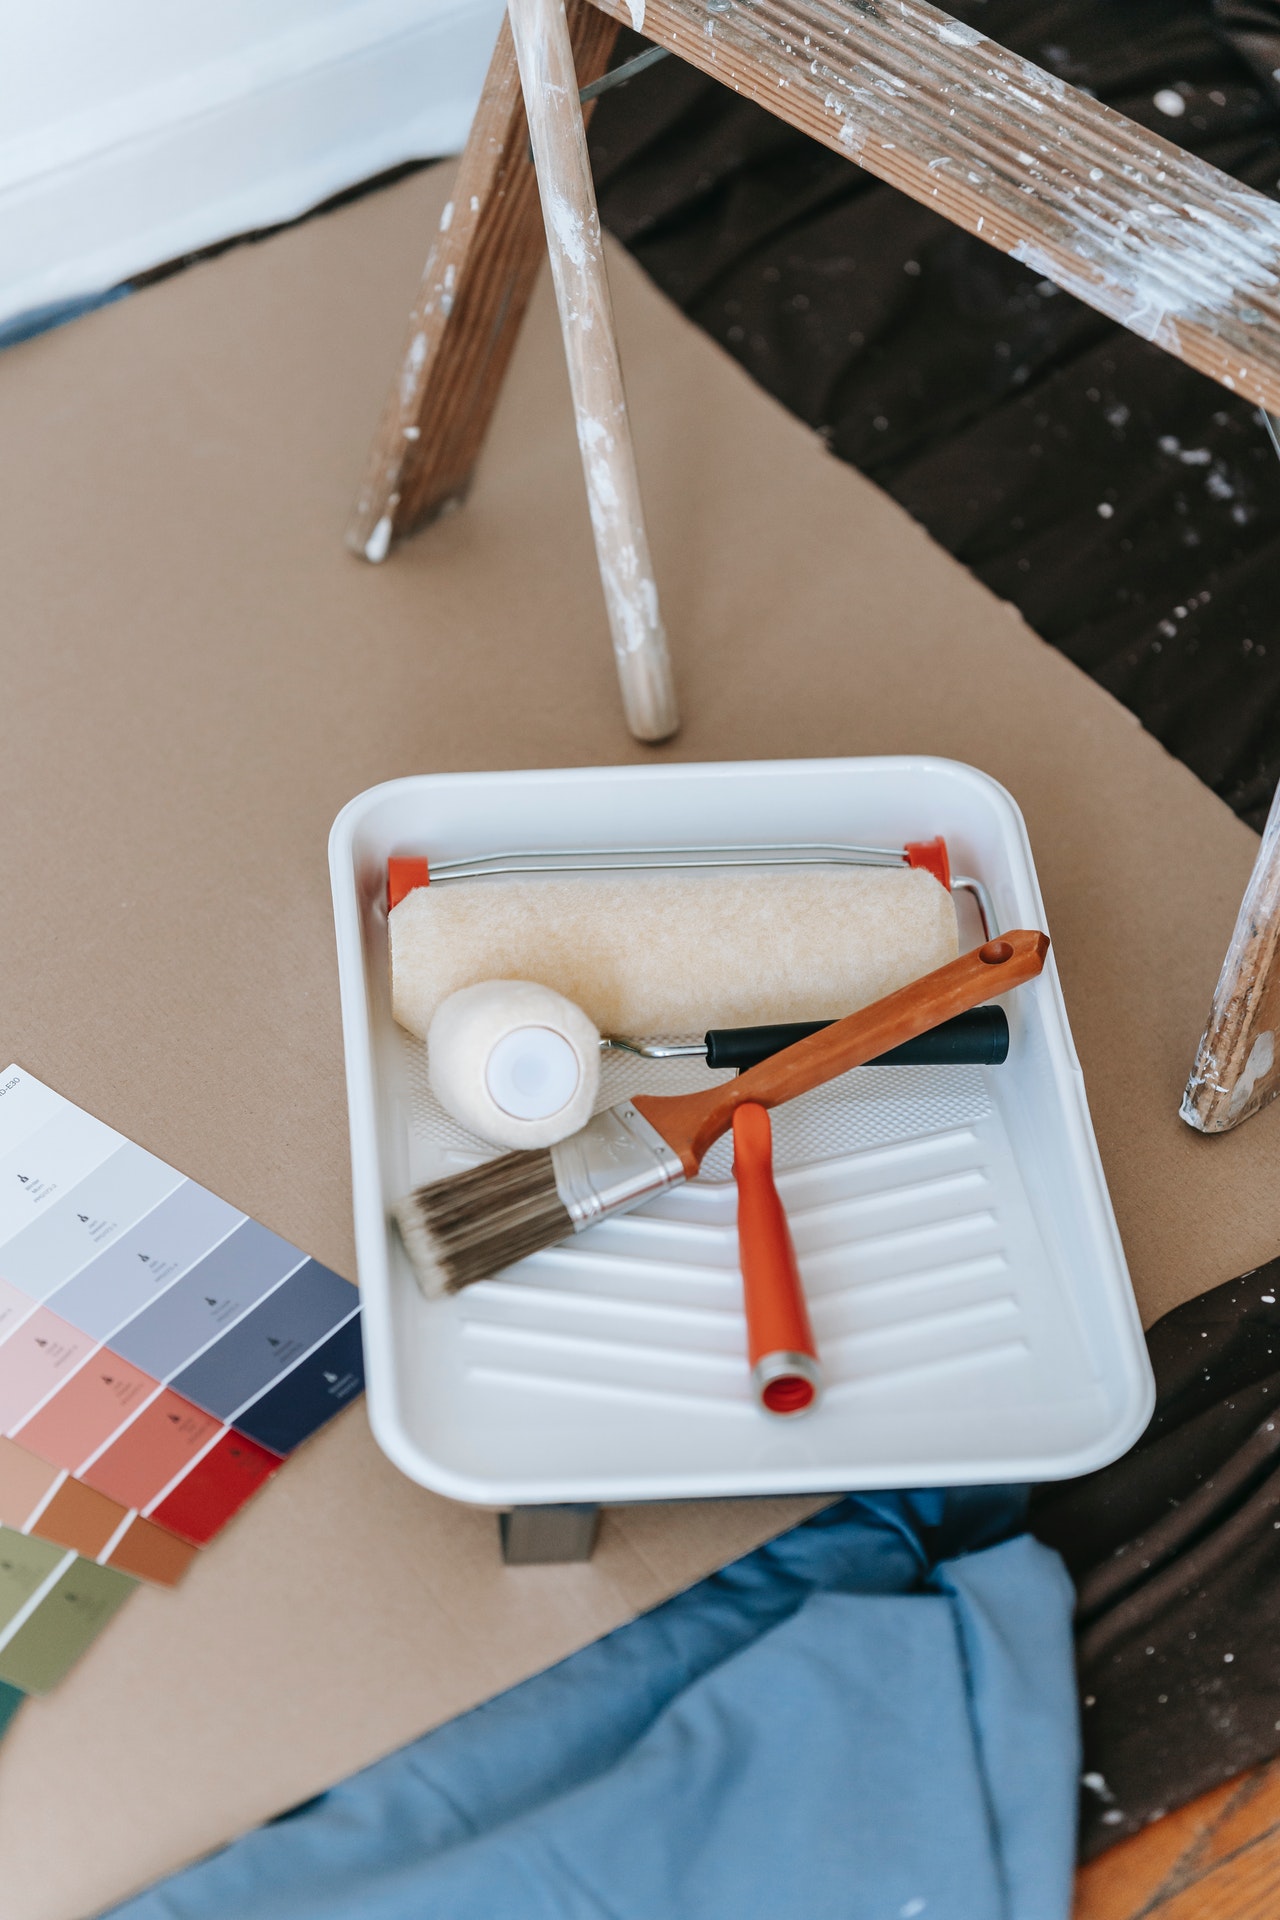 Painting supplies to paint walls in a house